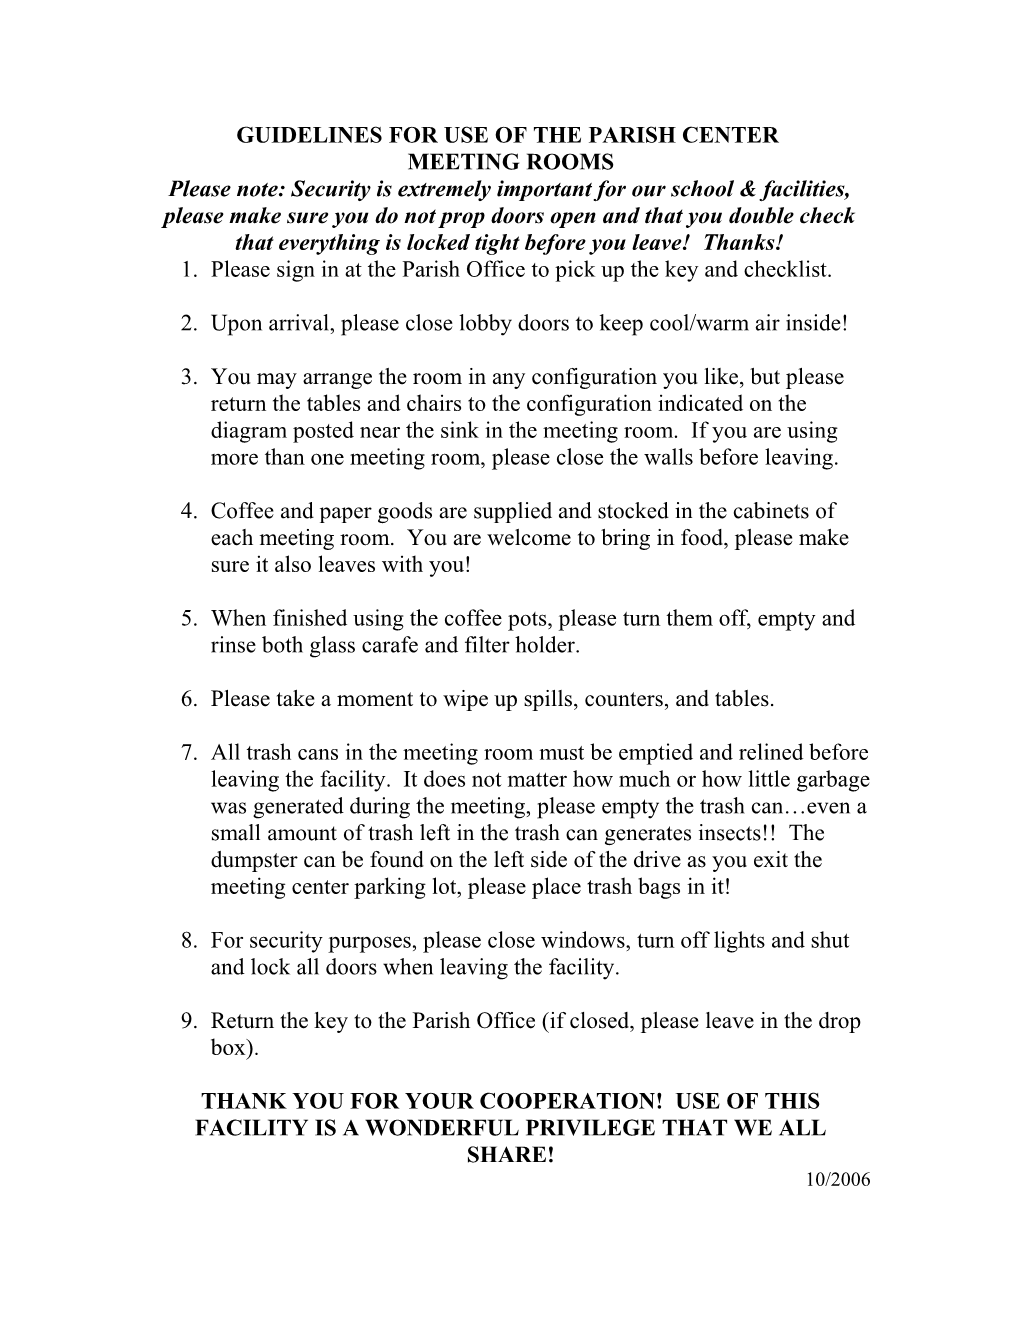 Guidelines for Use of the Parish Center